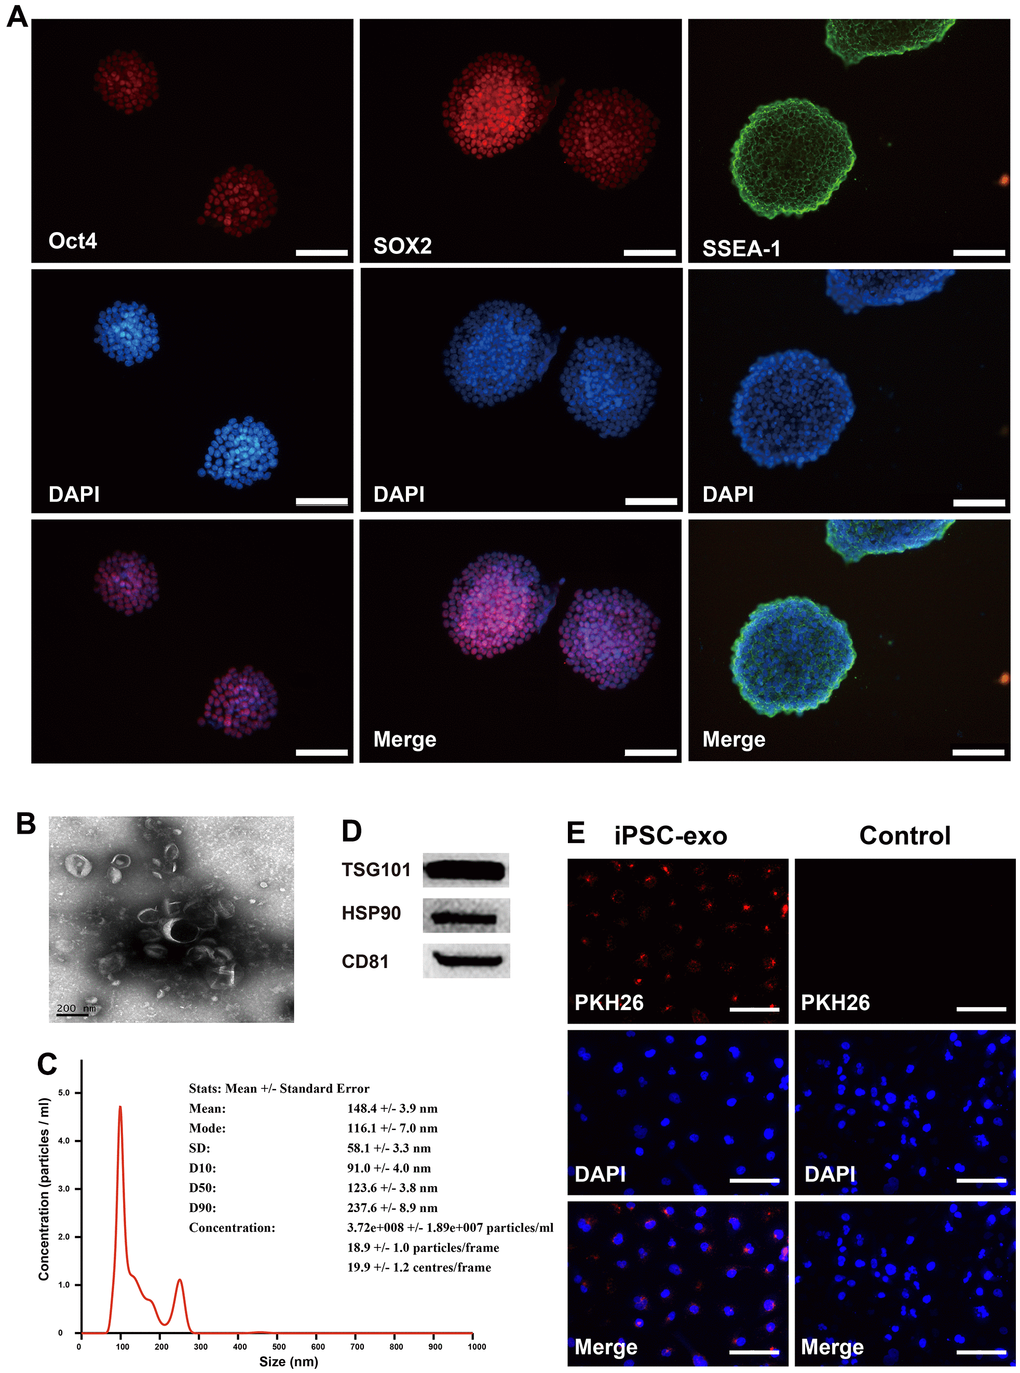 Identification of mouse iPSCs and their exosomes. (A) The cells were stained positive by immunofluorescence technique using specific antibodies for Oct4, SOX2 and SSEA-1. Oct4, octamer-binding transcription factor 4; SOX2, SRY-box transcription factor 2; SSEA-1, stage-specific embryonic antigen-1. (B) Transmission electron microscopy of iPSC-derived exosomes. (C) The concentrations and particle size of the exosomes were determined using nanoparticle tracking analysis. (D) Western blotting analysis was performed to detect the expression TSG101, HSP90, and CD81 in iPSC-derived exosomes. (E) Microscopic analysis of iPSC-derived exosomes taken up by HUVECs. Red, iPSC-derived exosomes labeled with PKH26; blue, the nuclei of HUVECs were counter-stained with DAPI. iPSCs, mouse induced pluripotent stem cells; exo, exosomes. TSG101, tumor susceptibility gene 101 protein; heat shock protein 90; CD31, cluster of differentiation molecule 31.